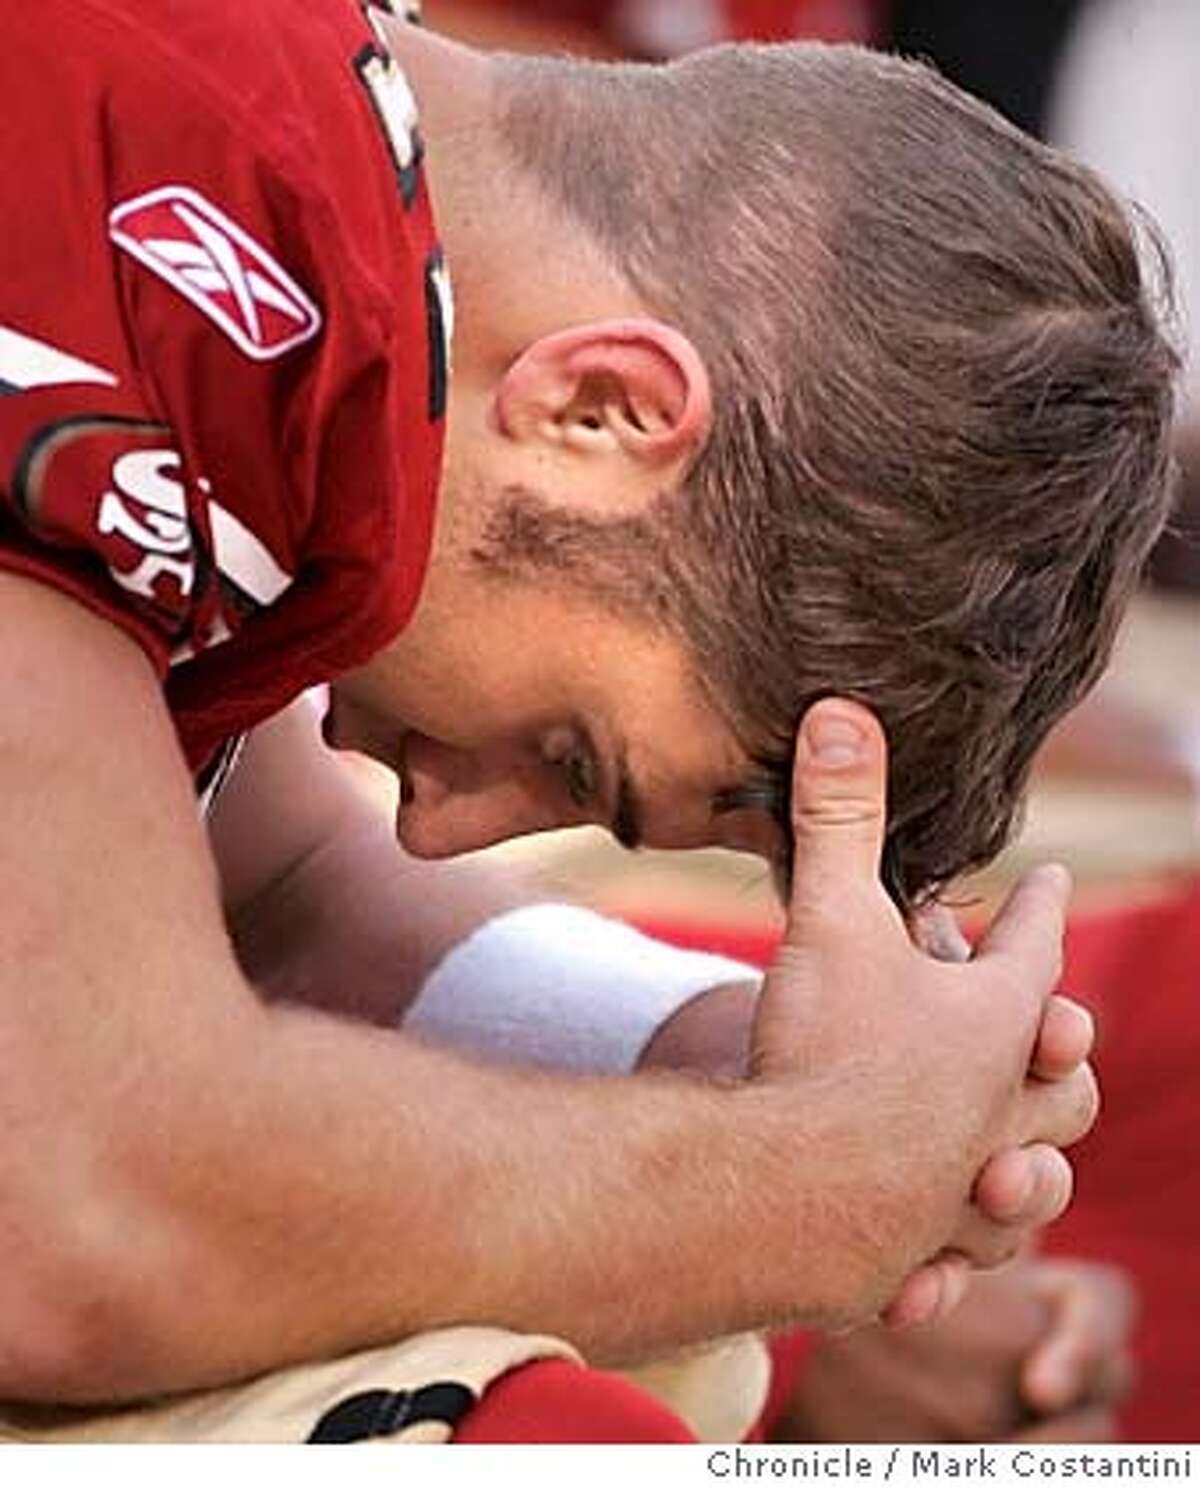 49ers quarterback Alex Smith buries his head in his hands late in the final seconds of the game. 49ers lose to the Arizona Cardinals as Monster Park. Event on 12/04/05 in San Francisco Photo: Mark Costantini /San Francisco Chronicle